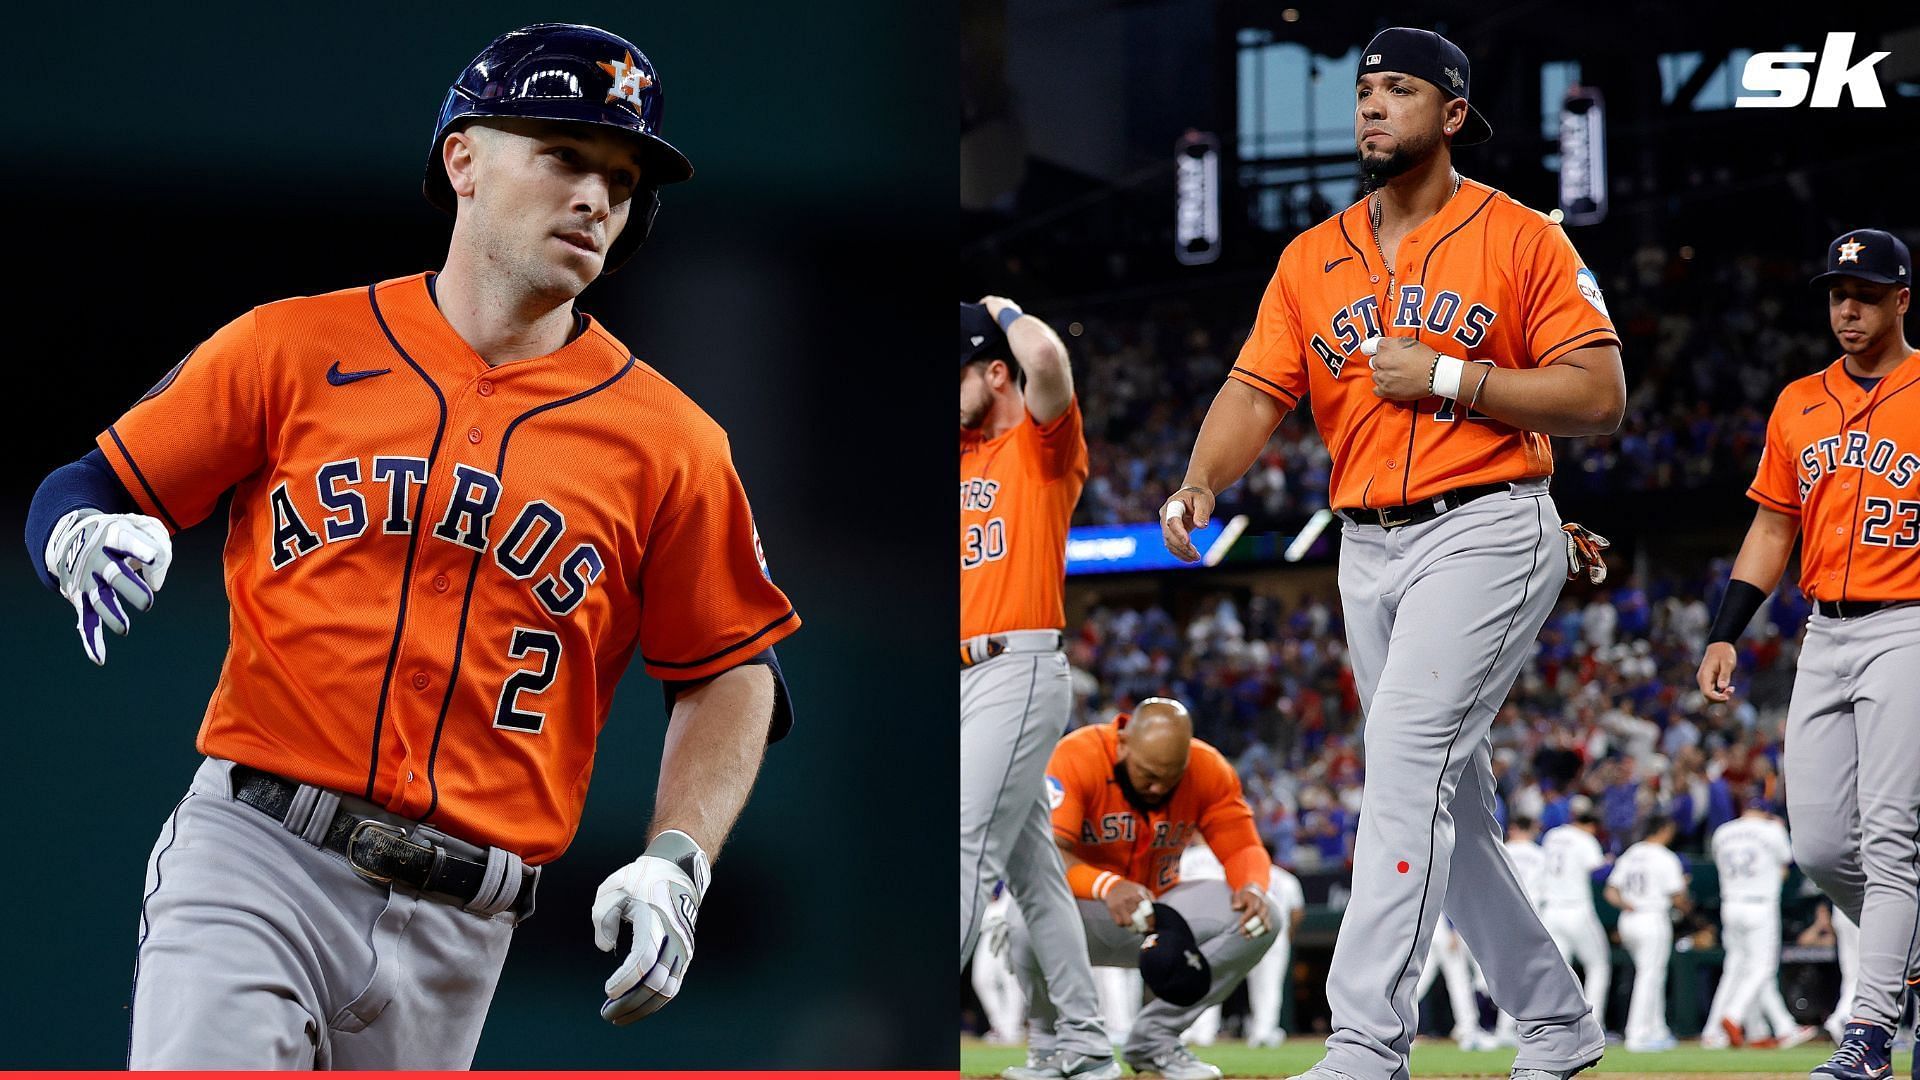 Some Astros players have had a harrowing start to the year